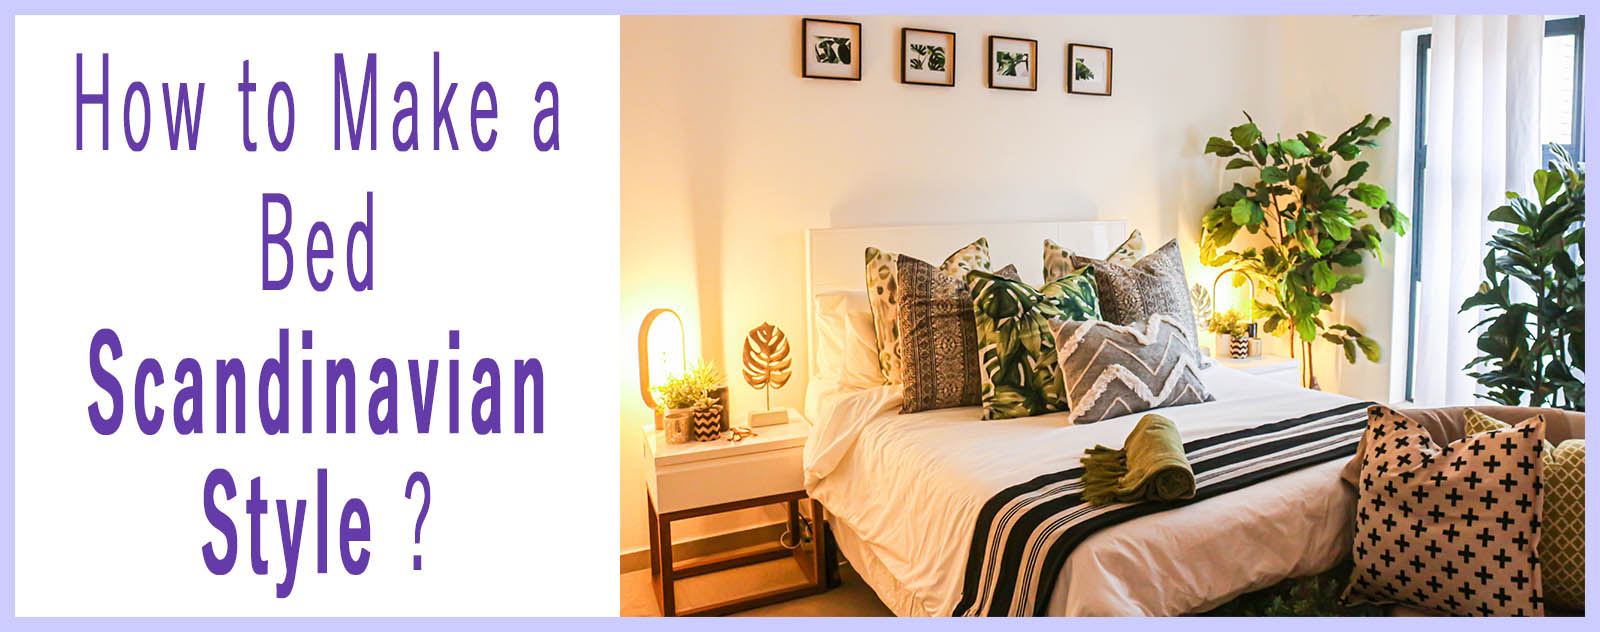 How to Make a Bed Scandinavian Style